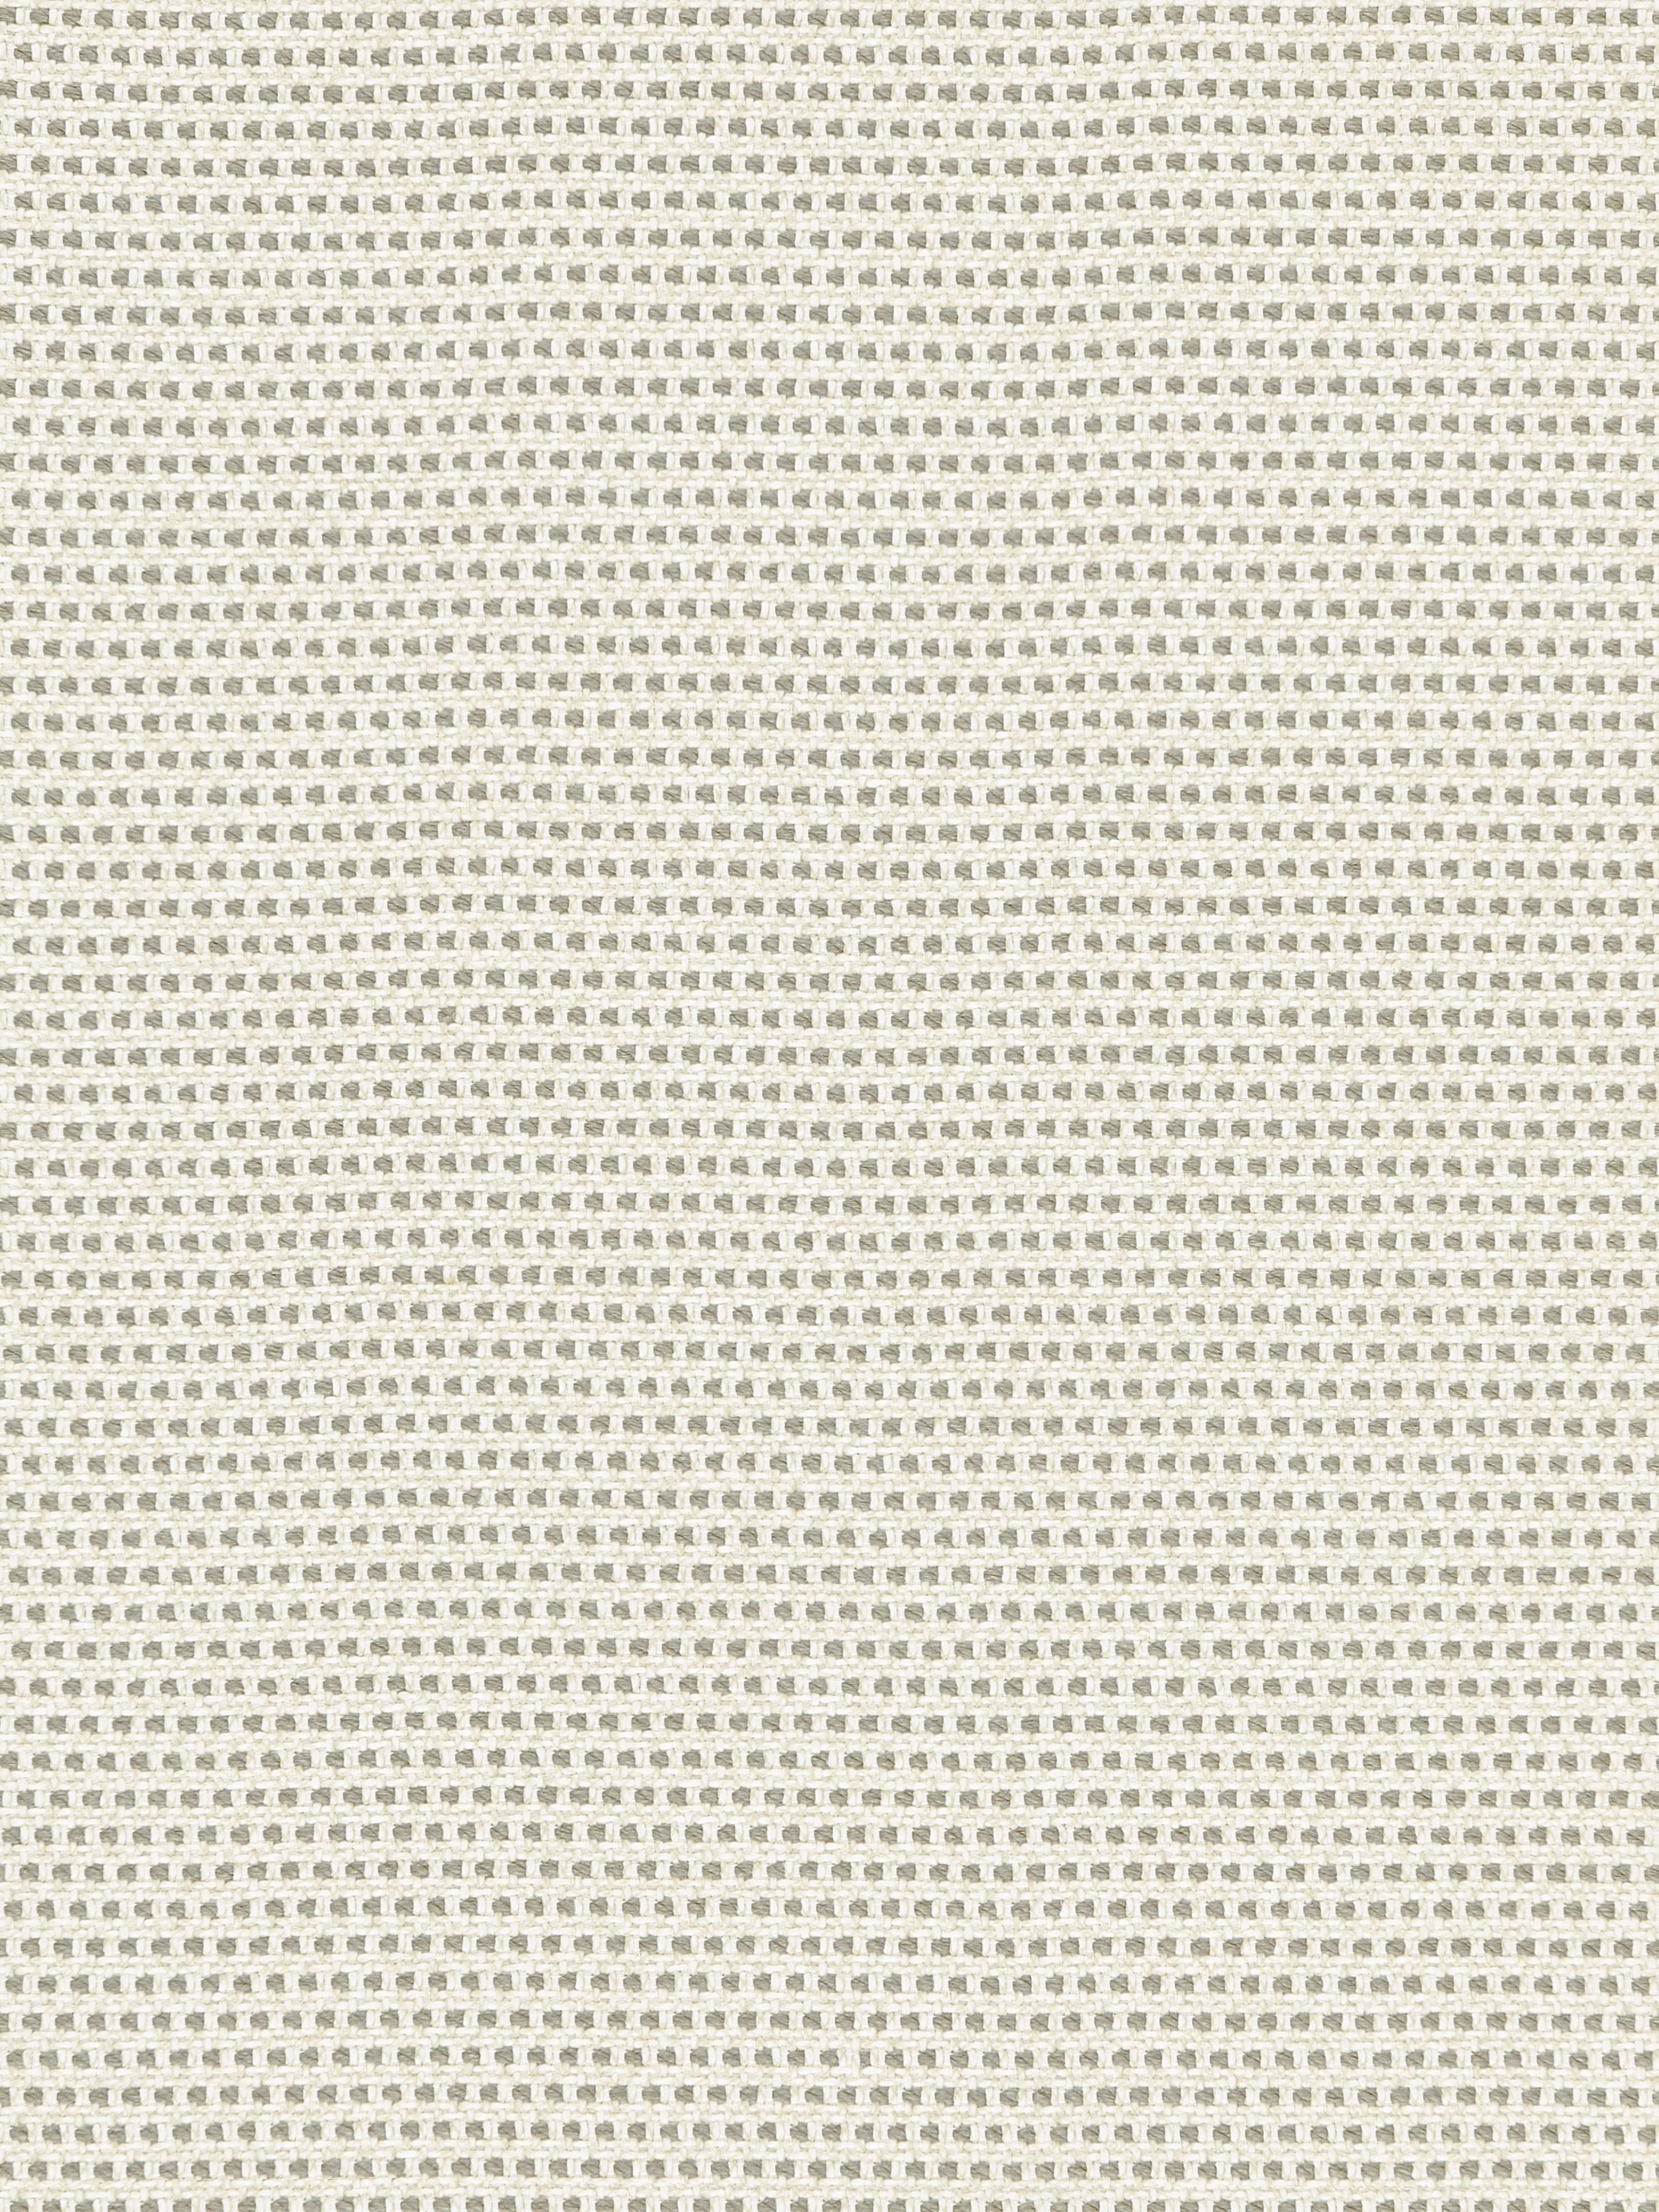 El Faro Beach fabric in linen color - pattern number EA 00026037 - by Scalamandre in the Old World Weavers collection